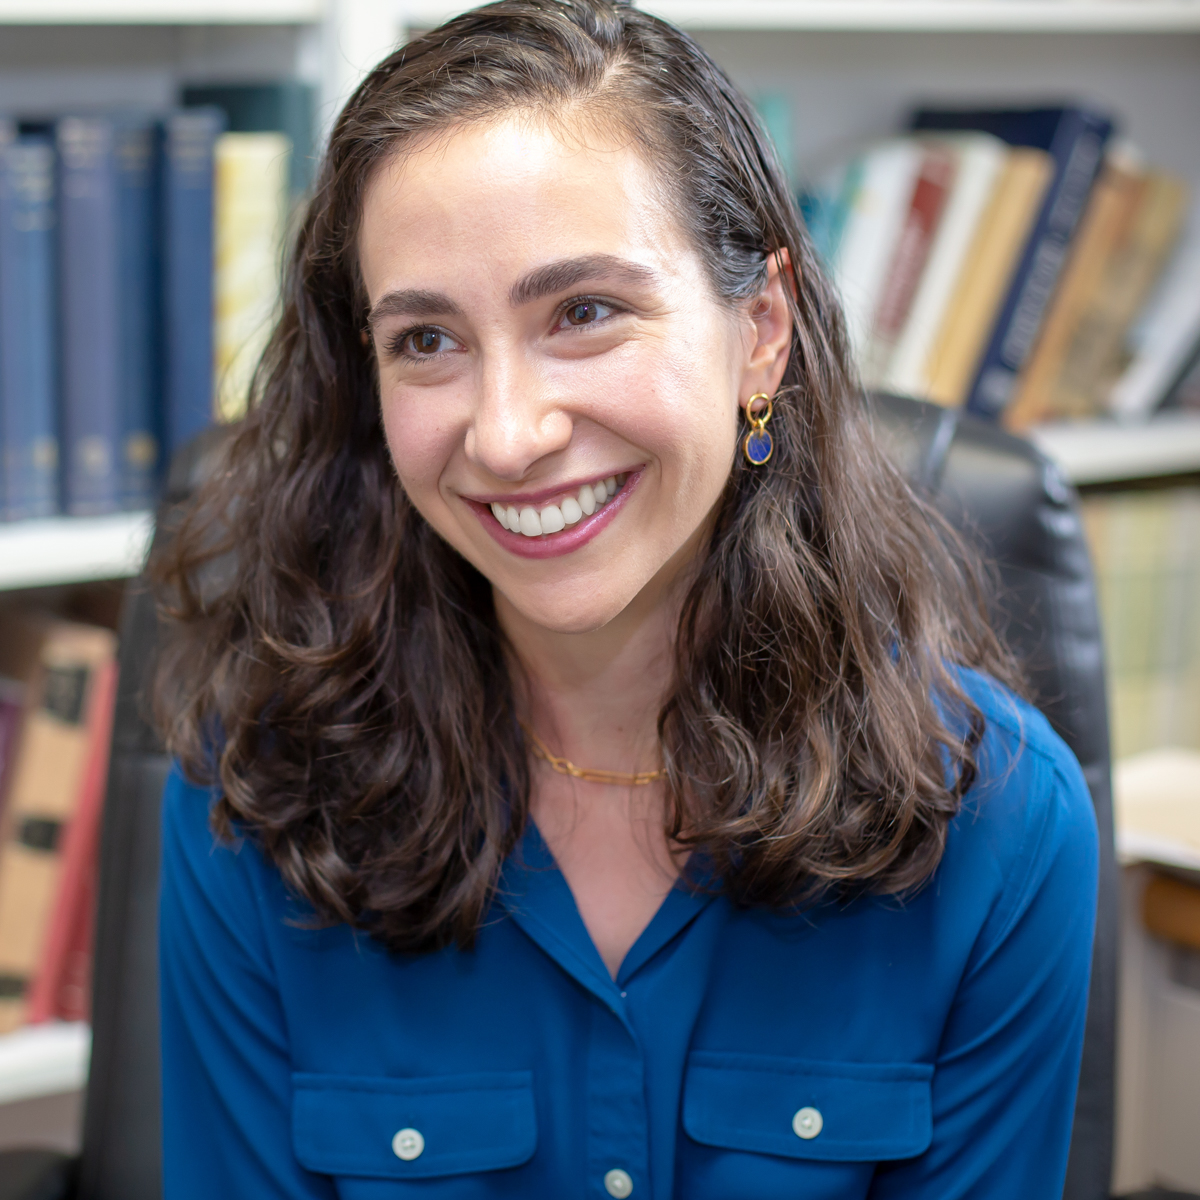 Coming Soon: New Spring Webinar Series on the Power of Emotion: Judaism and the Inner Life